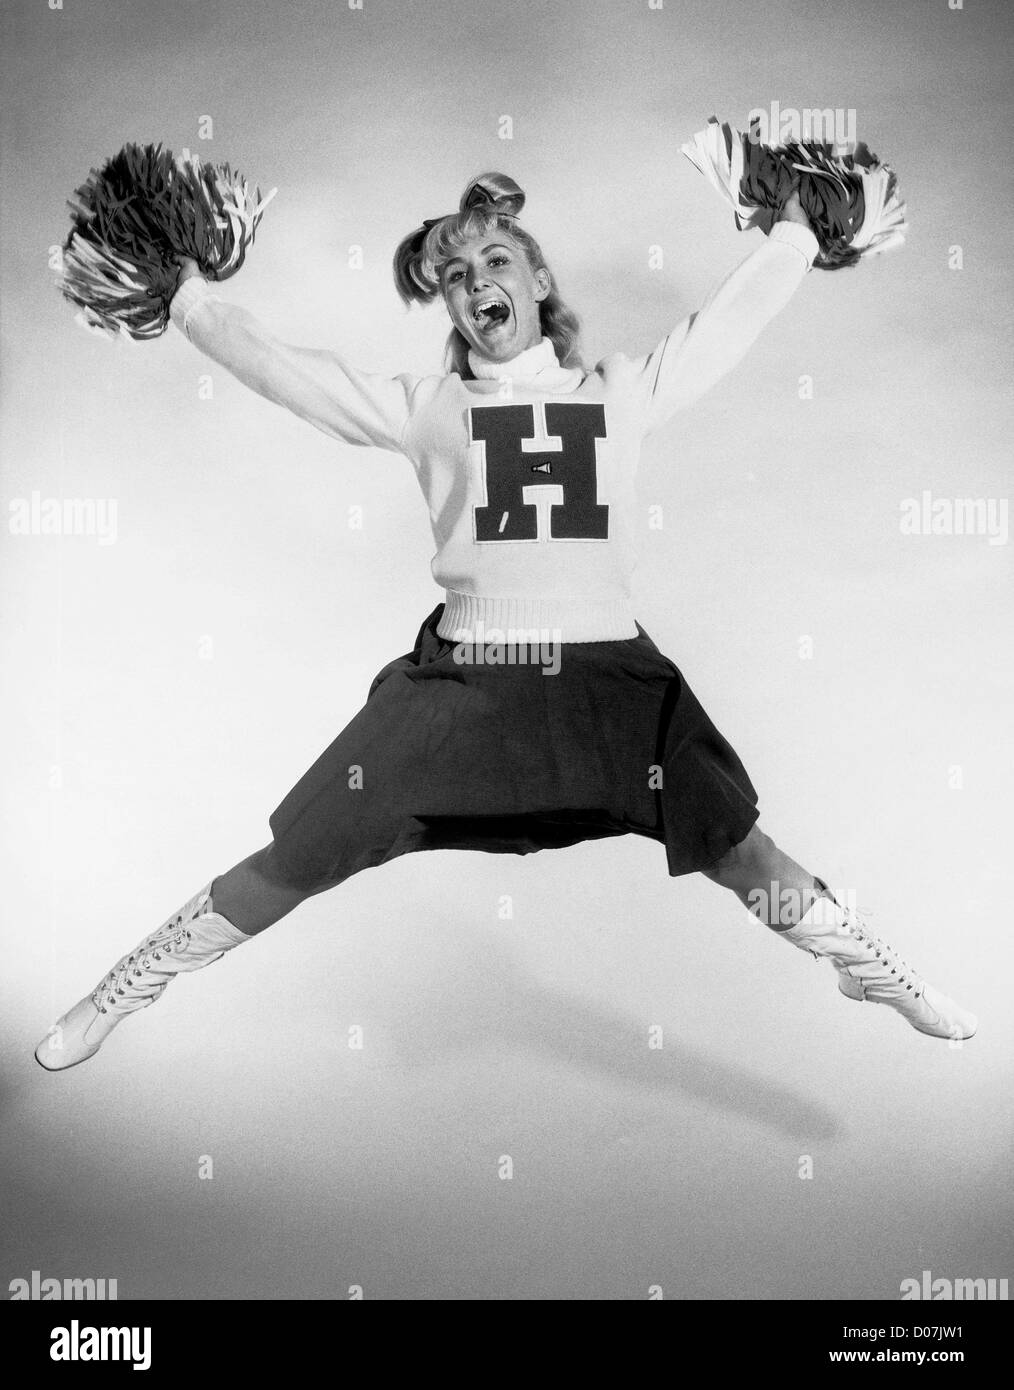 Cheerleader with pom-poms jumps in the air Stock Photo